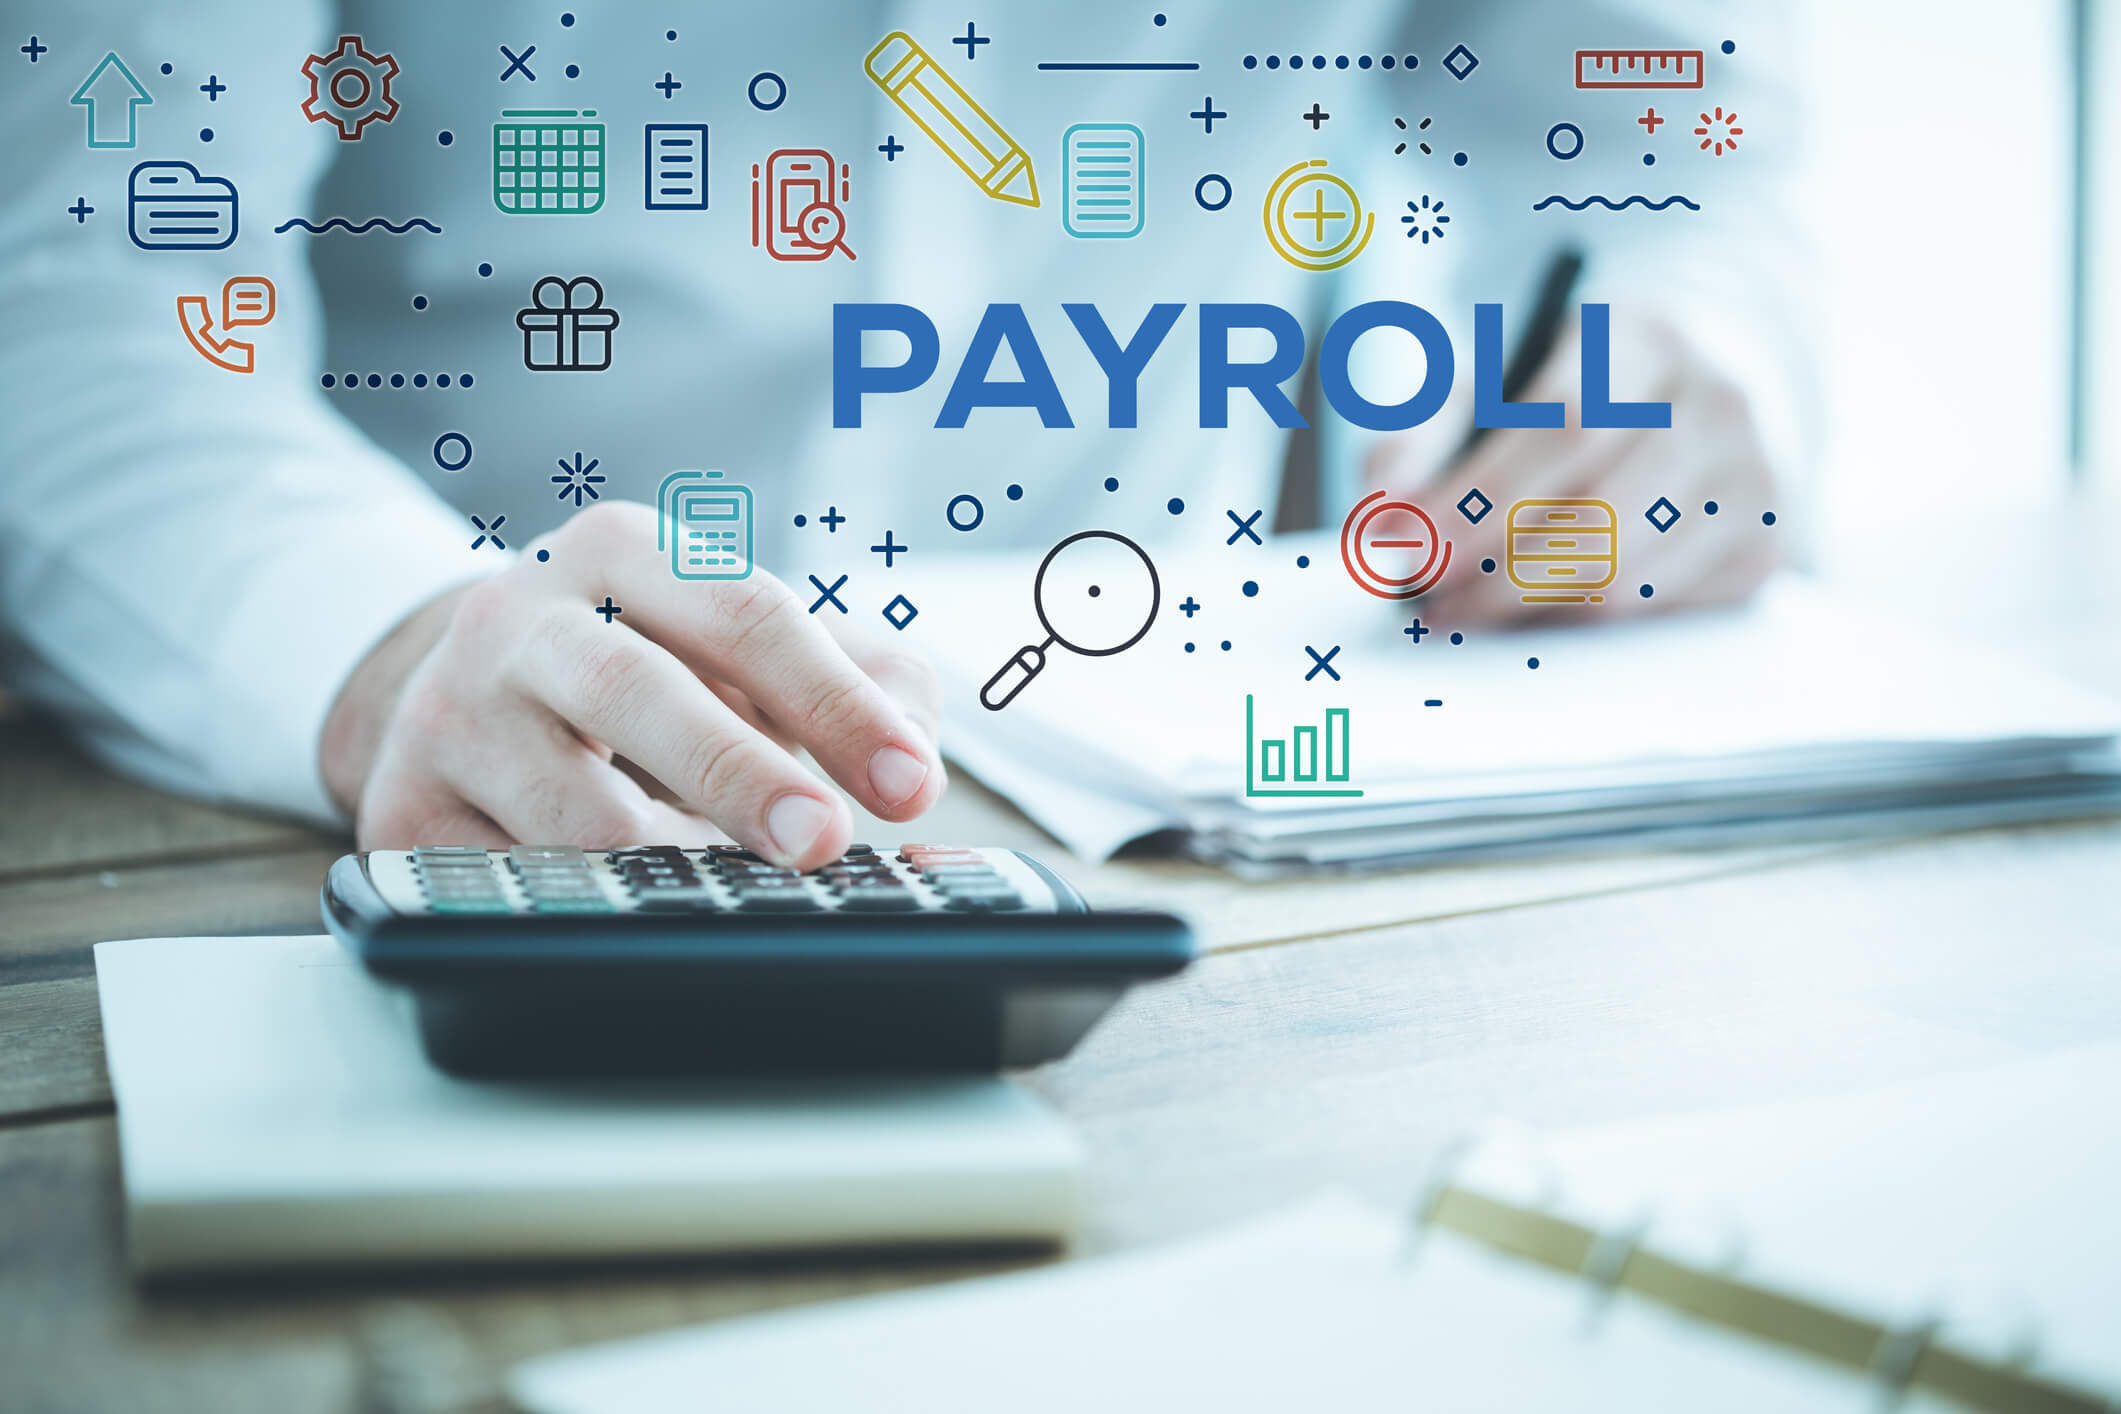 Payroll - Complete Controller